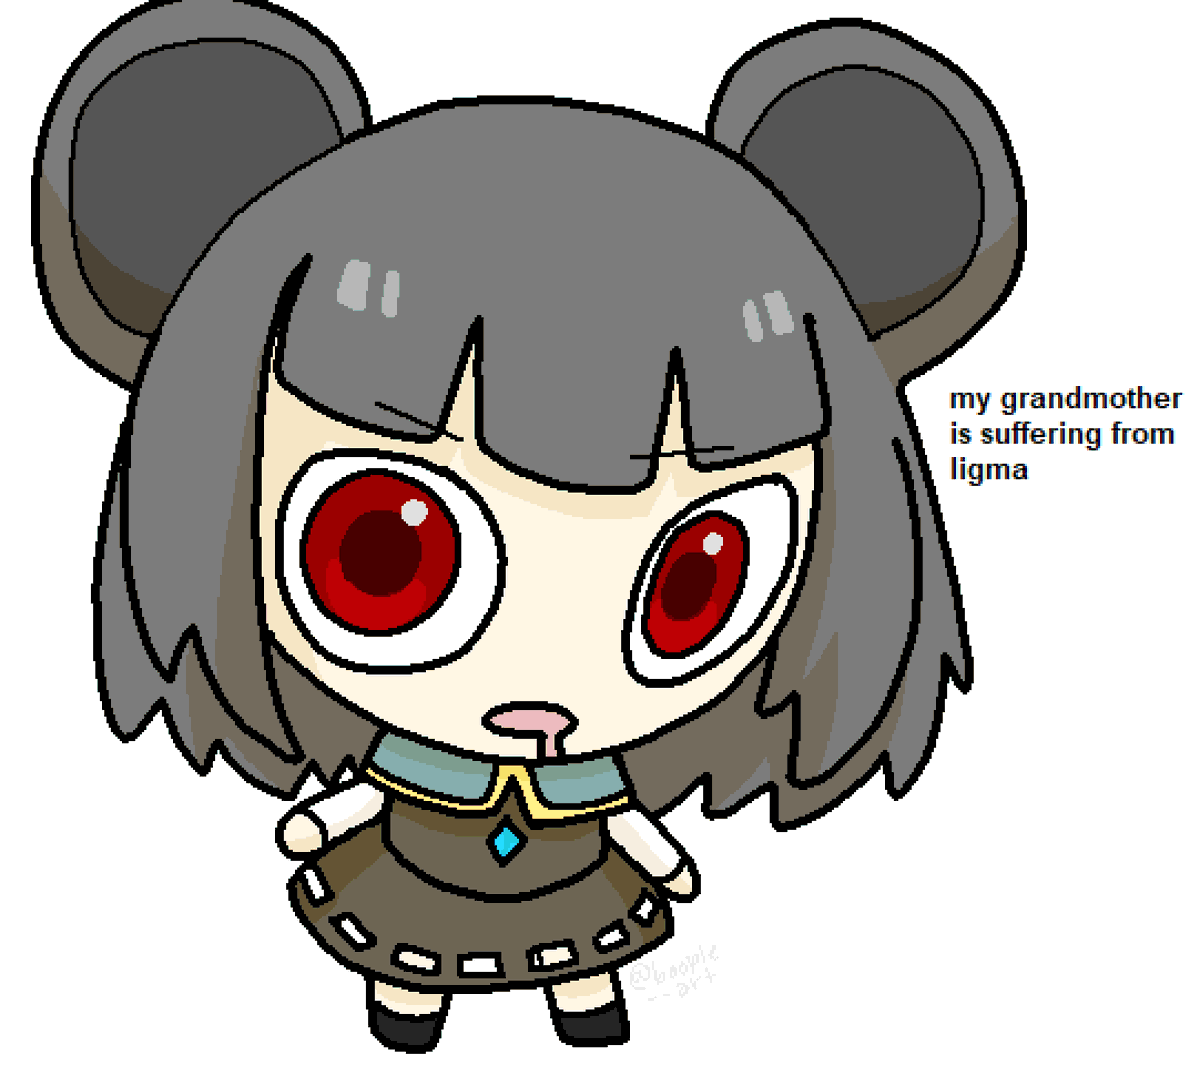 「nazrin owns momiji epic style 」|bloopy ꒰꒰꒰ᓚᘏᗢのイラスト